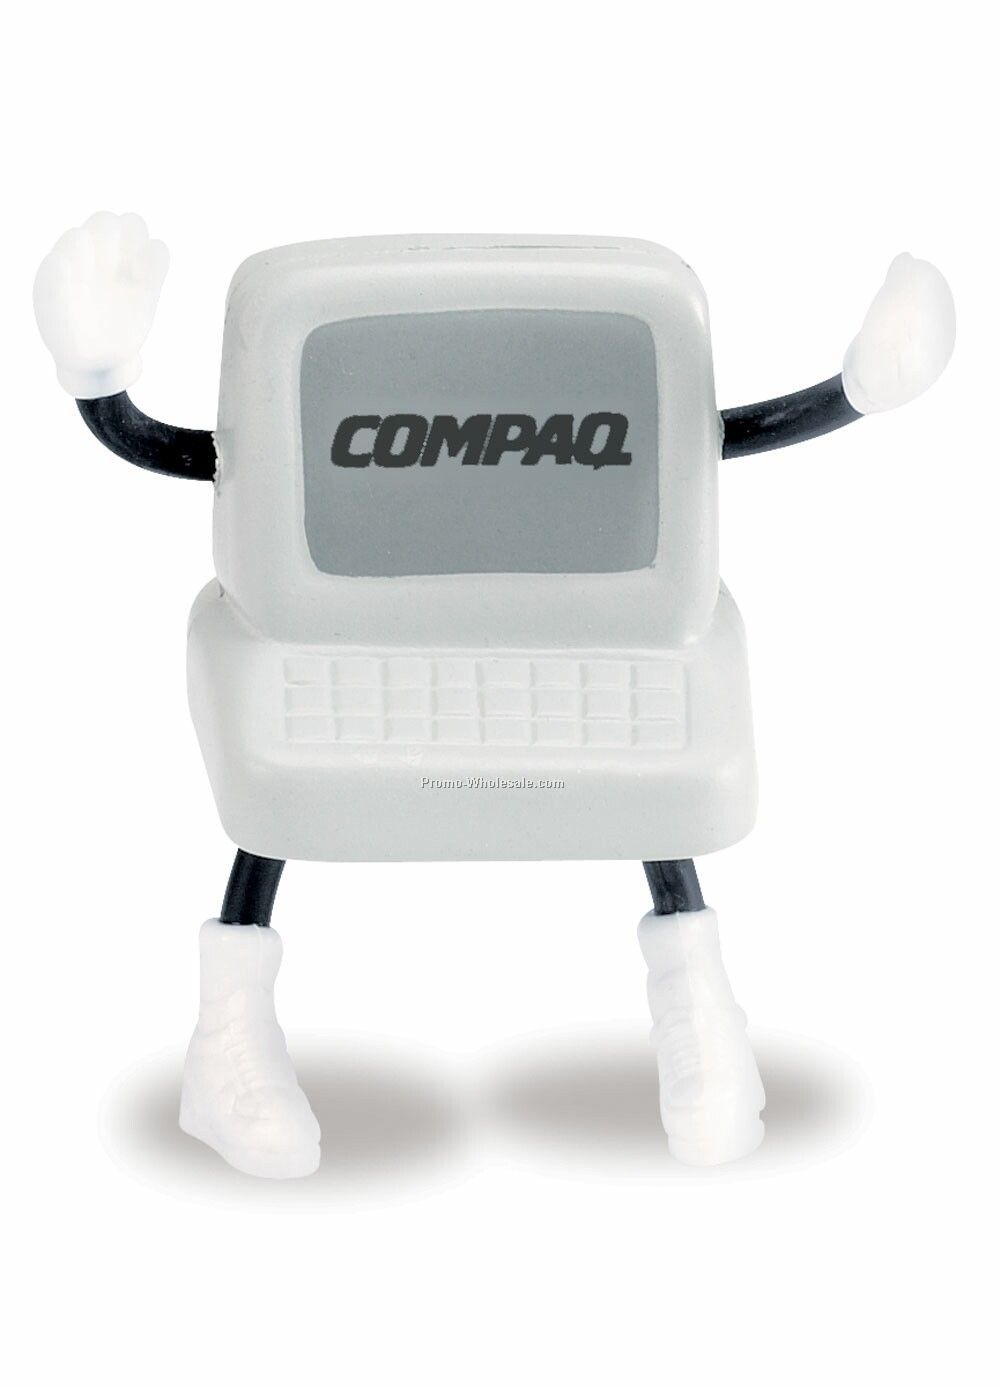 Computer Man Squeeze Toy